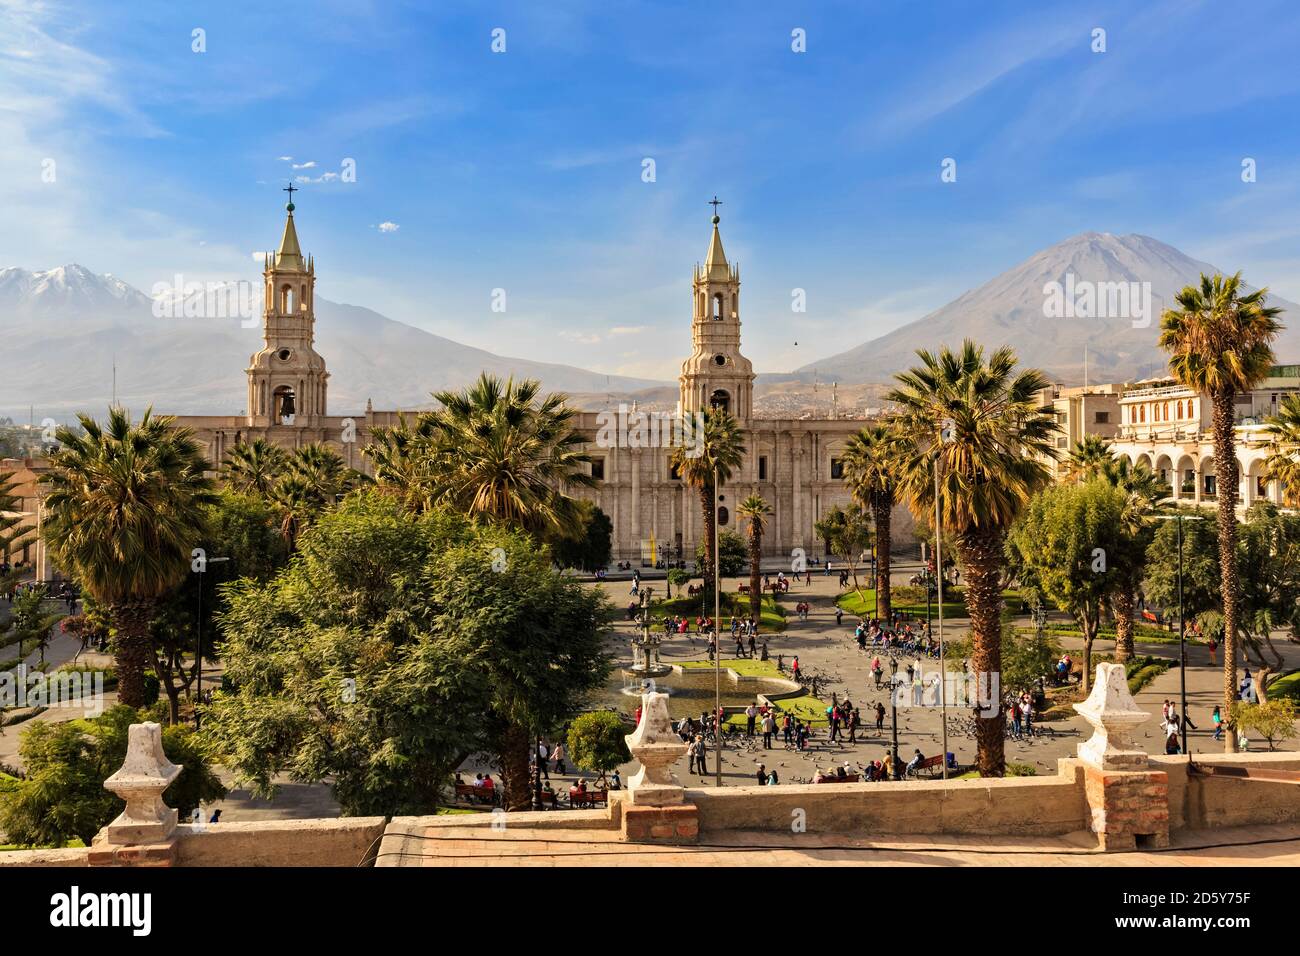 Peru, Arequipa, Plaza de Armas, volcanoes Chachani and Misti and cathedral Stock Photo